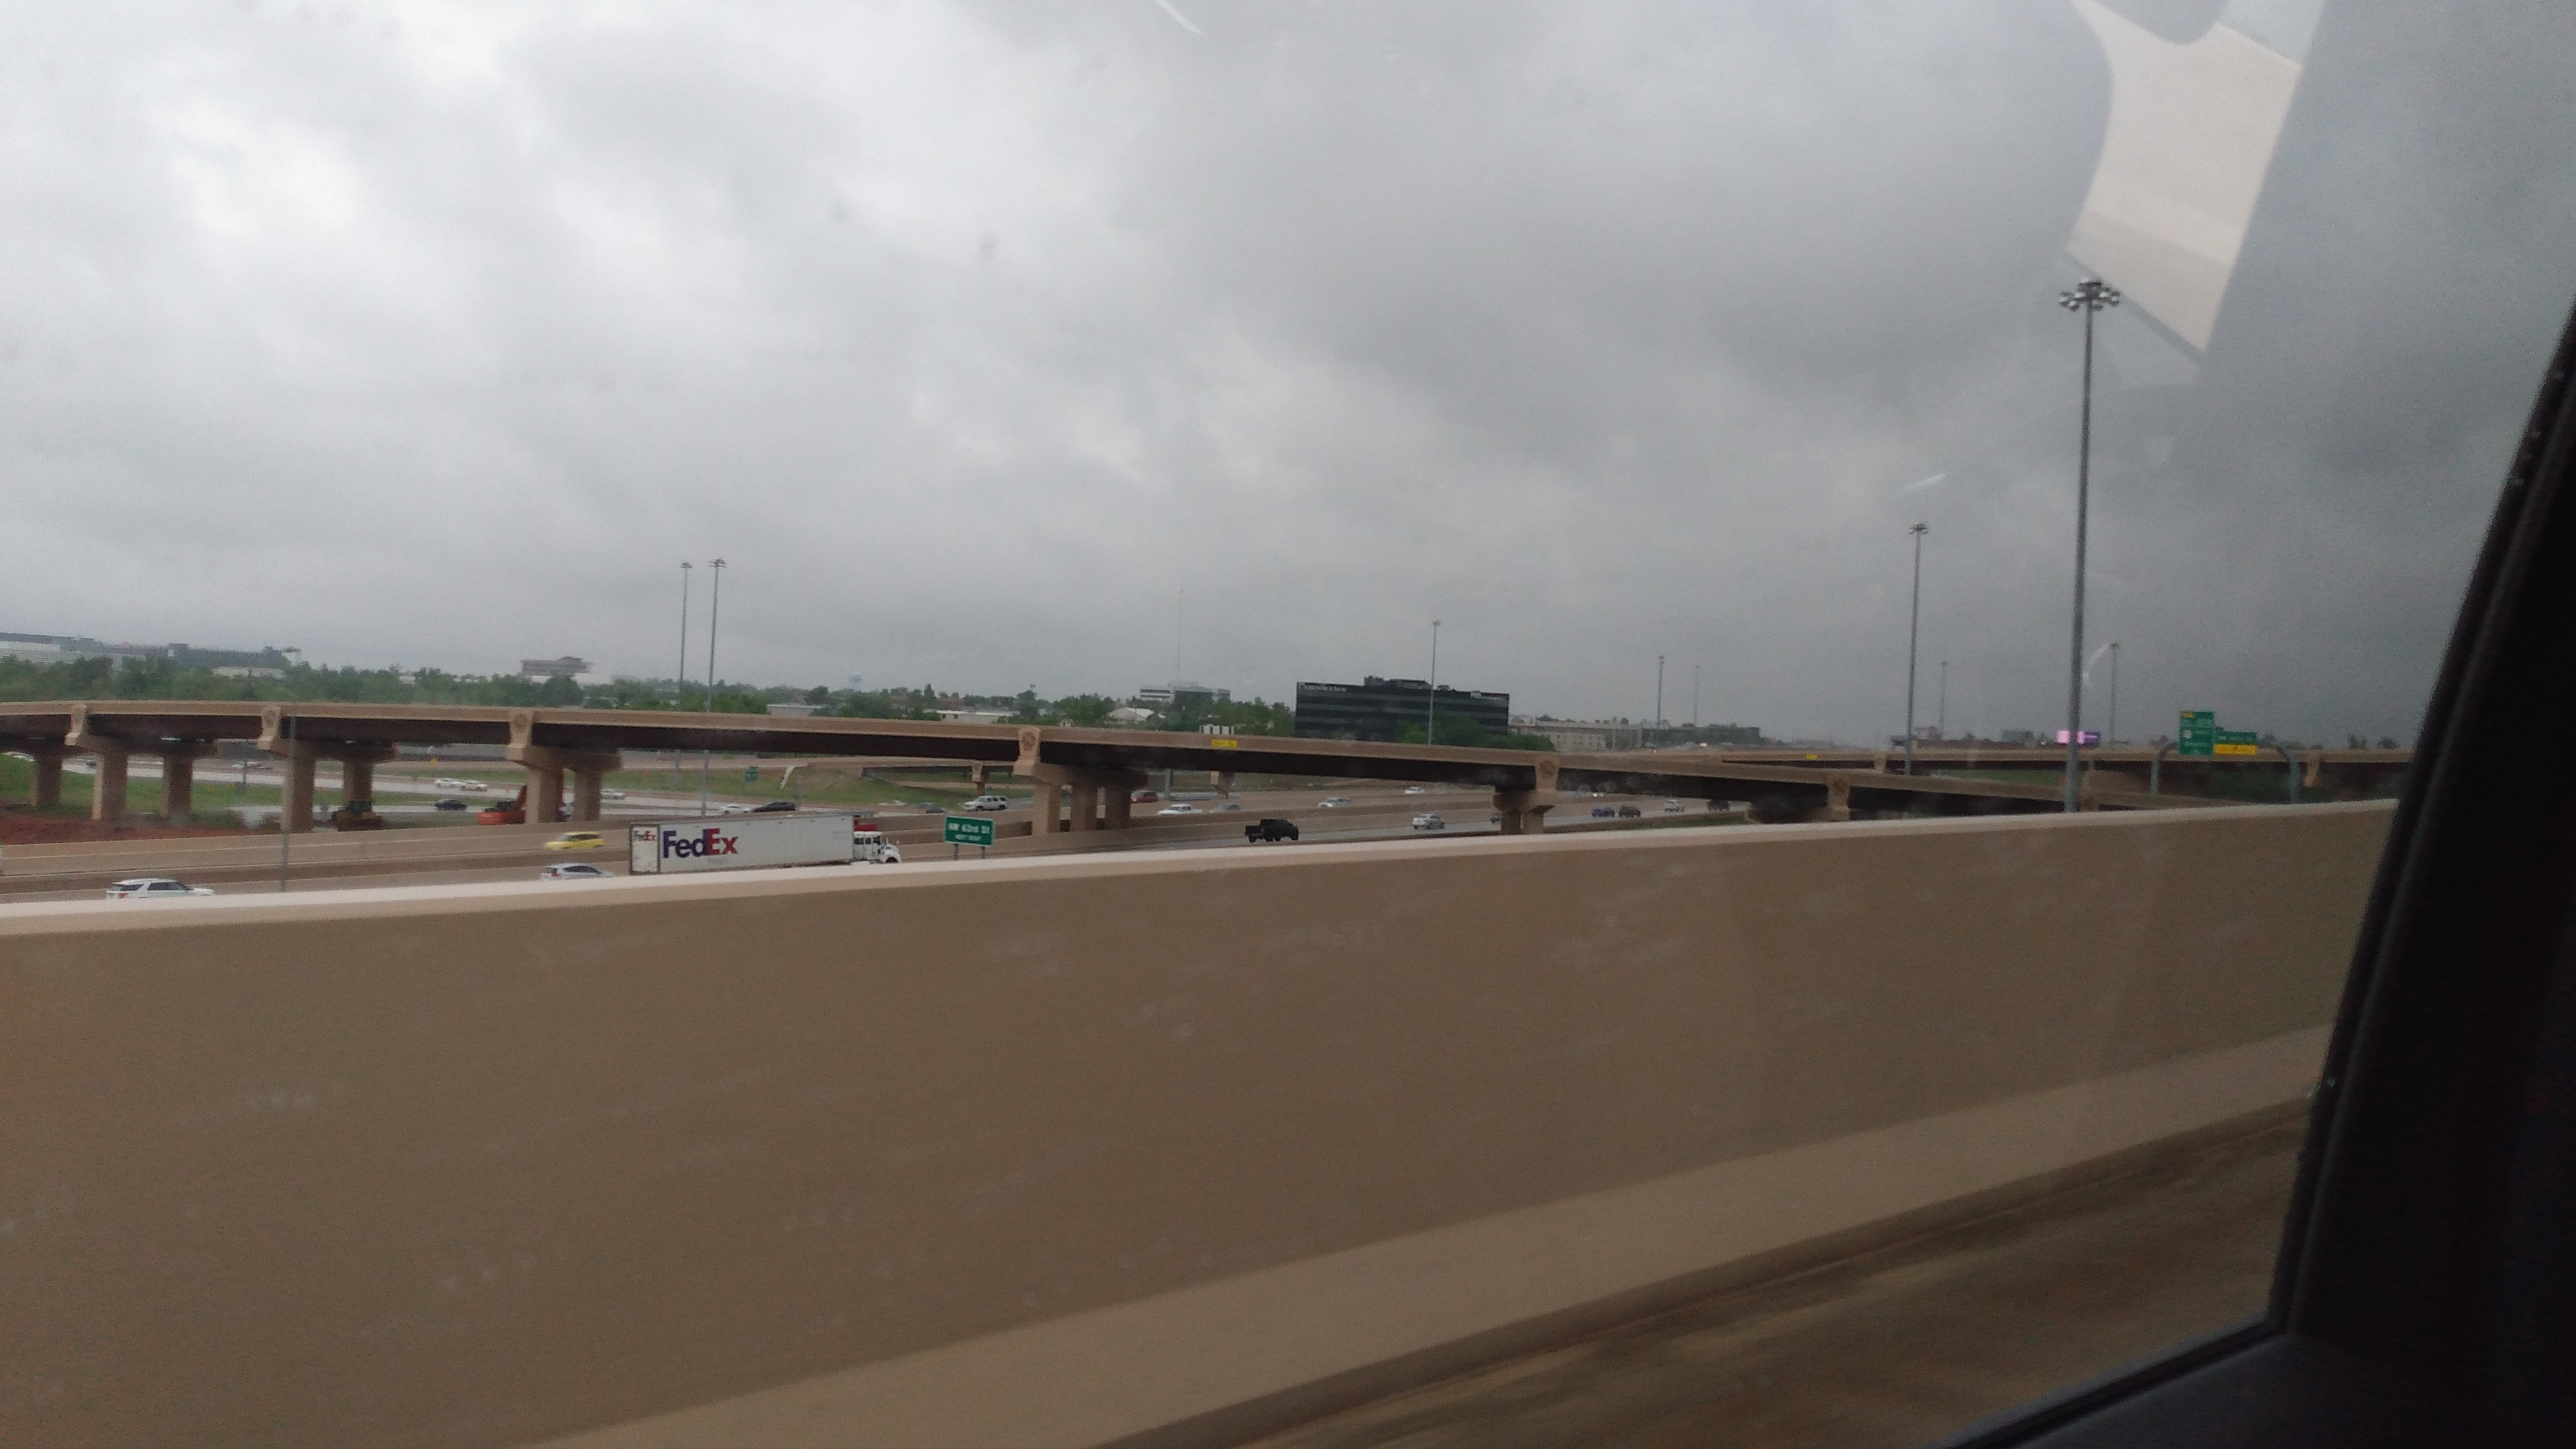 Interstate 235 in Northern Oklahoma City at its northern terminus at the exit 4 interchange with I-44/SH-66 with US 77 (Broadway Extension) continuing northward.